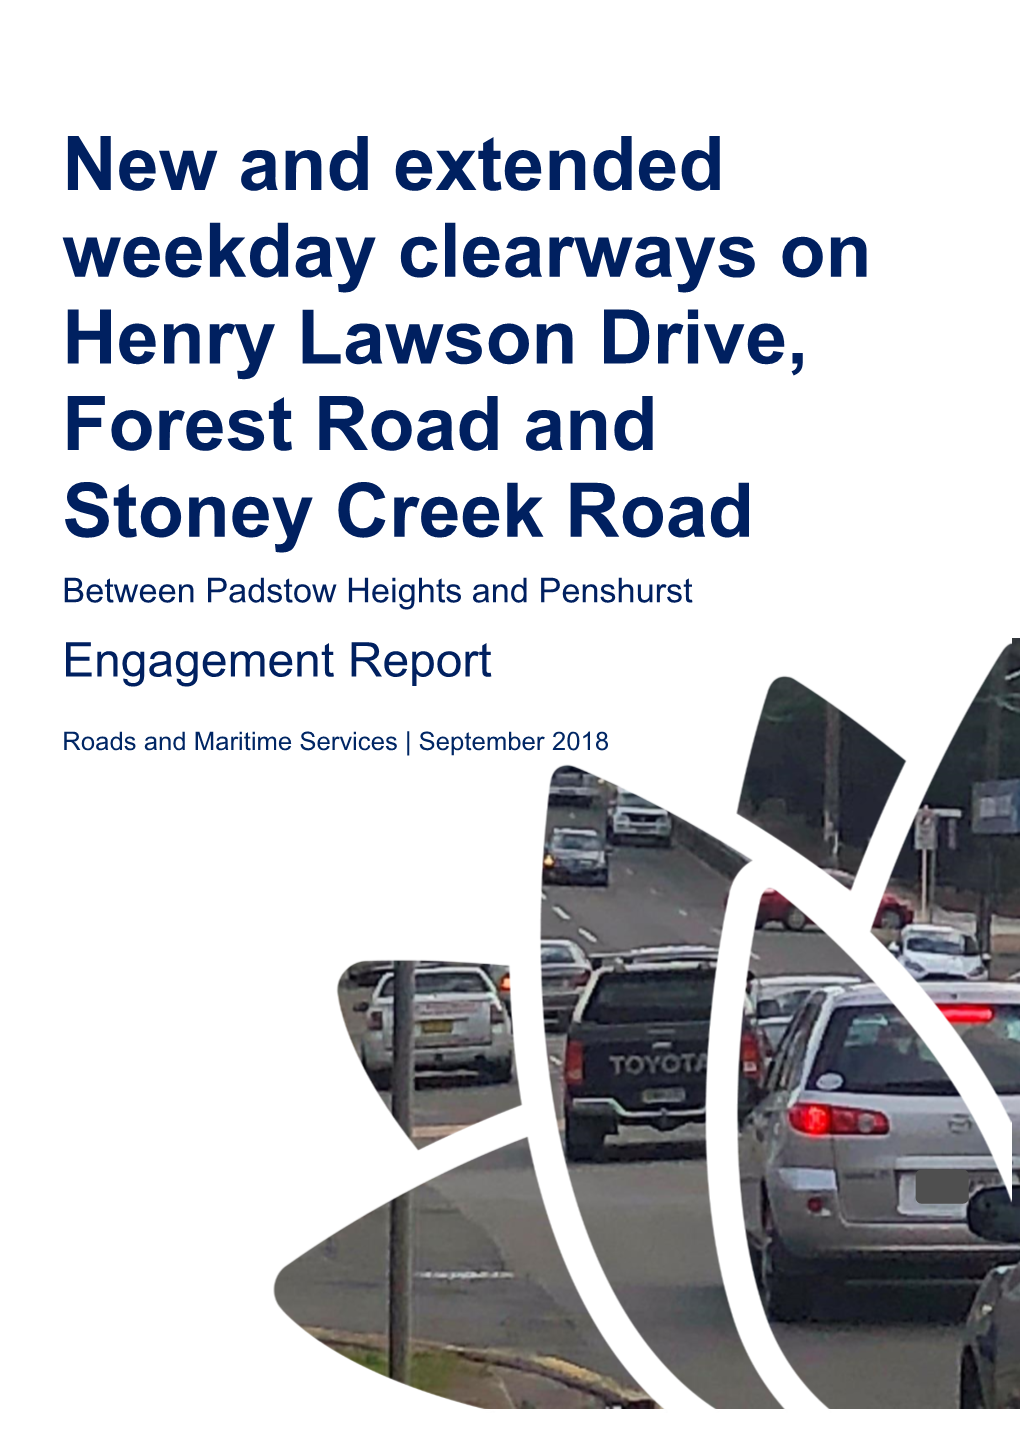 New and Extended Weekday Clearways on Henry Lawson Drive, Forest Road and Stoney Creek Road